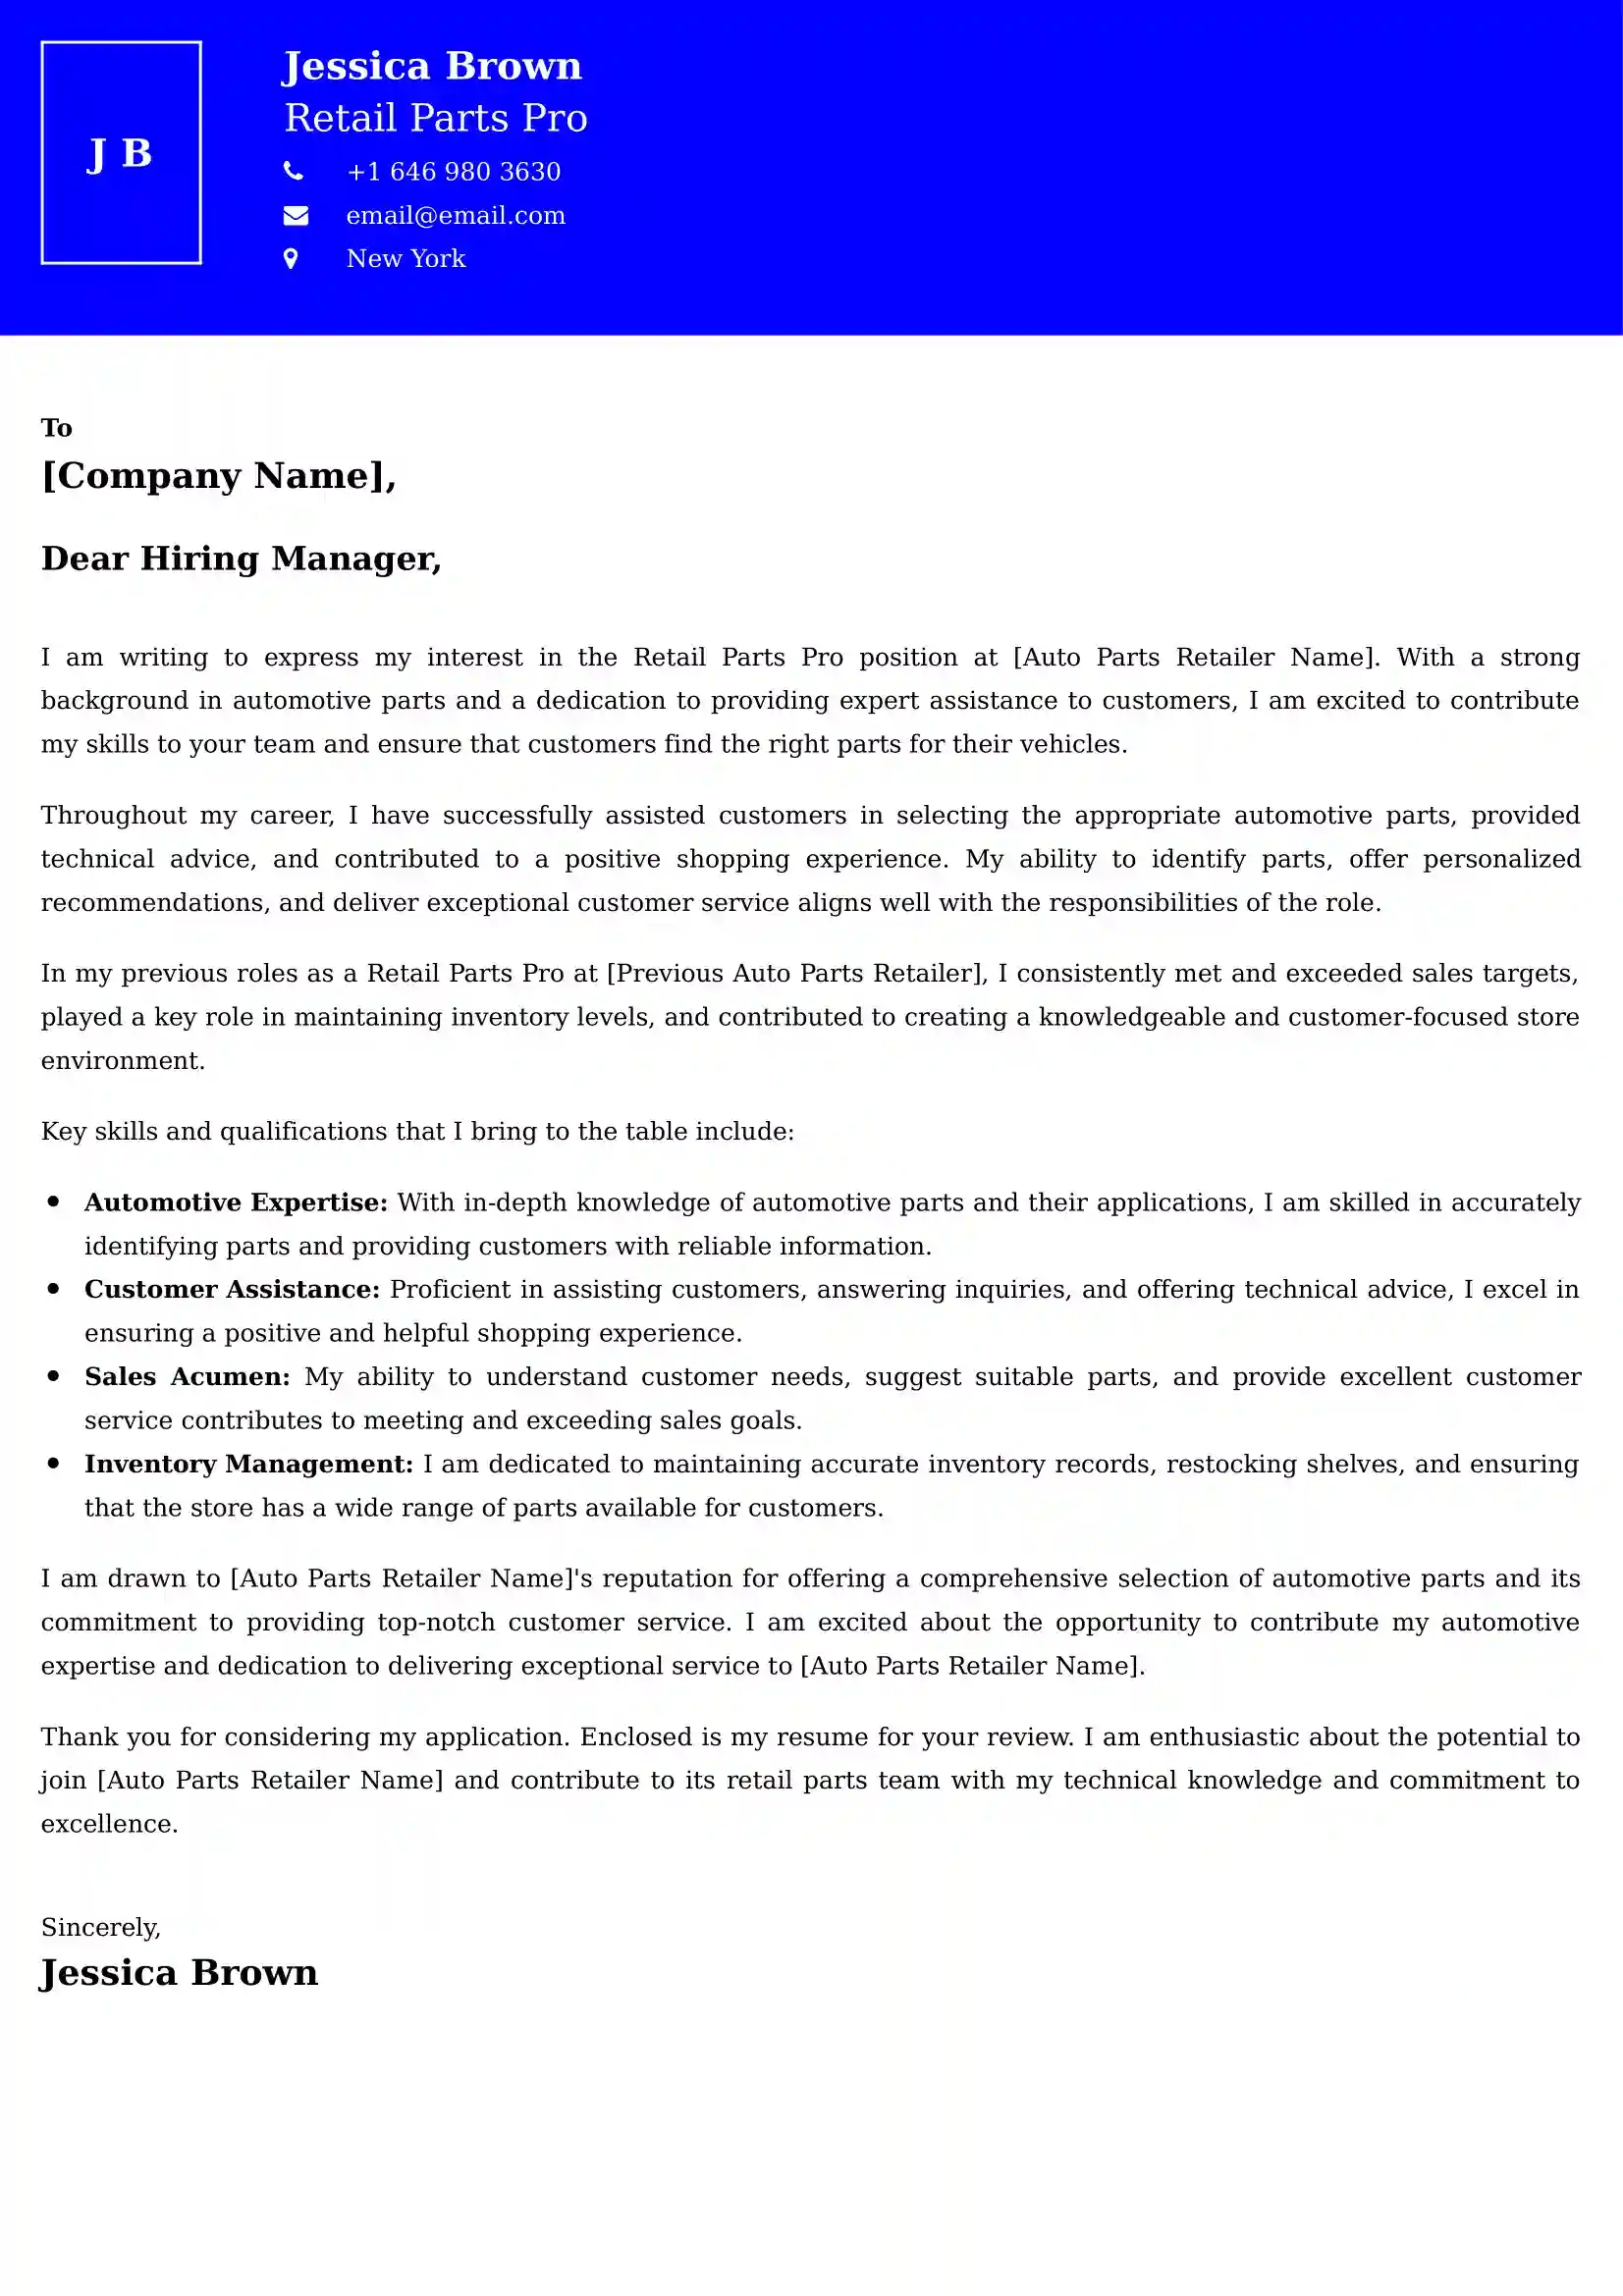 Retail Parts Pro Cover Letter Examples - Latest UK Format